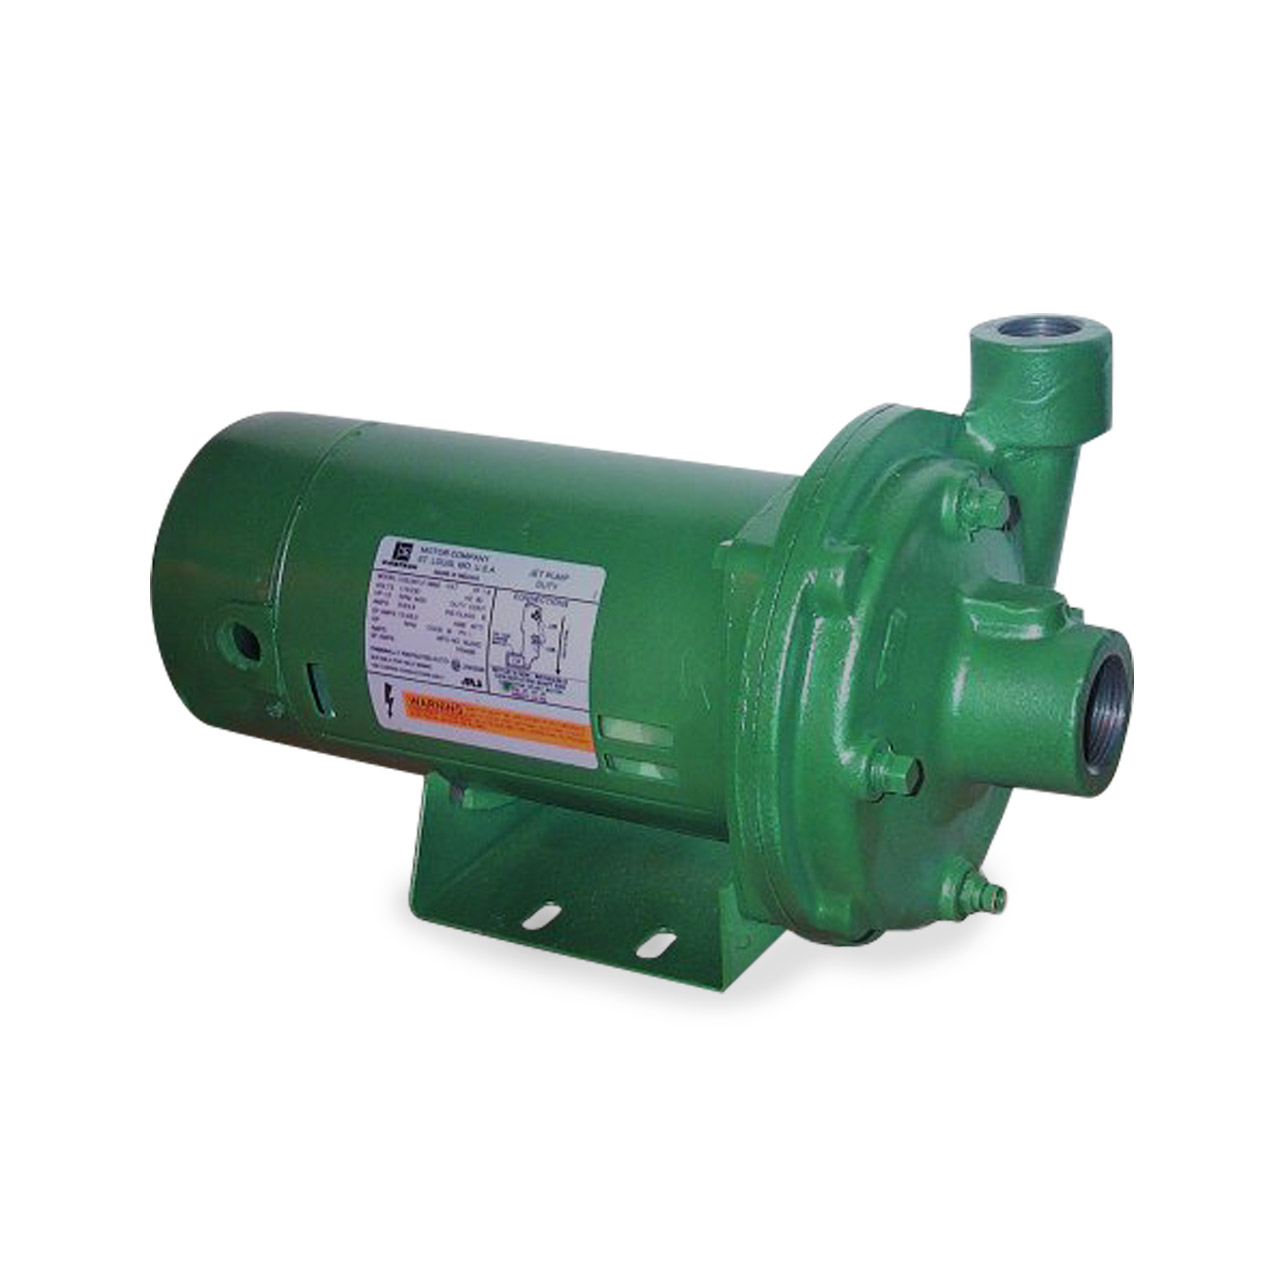 Double Suction Centrifugal Pump, Max Flow Rate: 4200m3/h at Rs